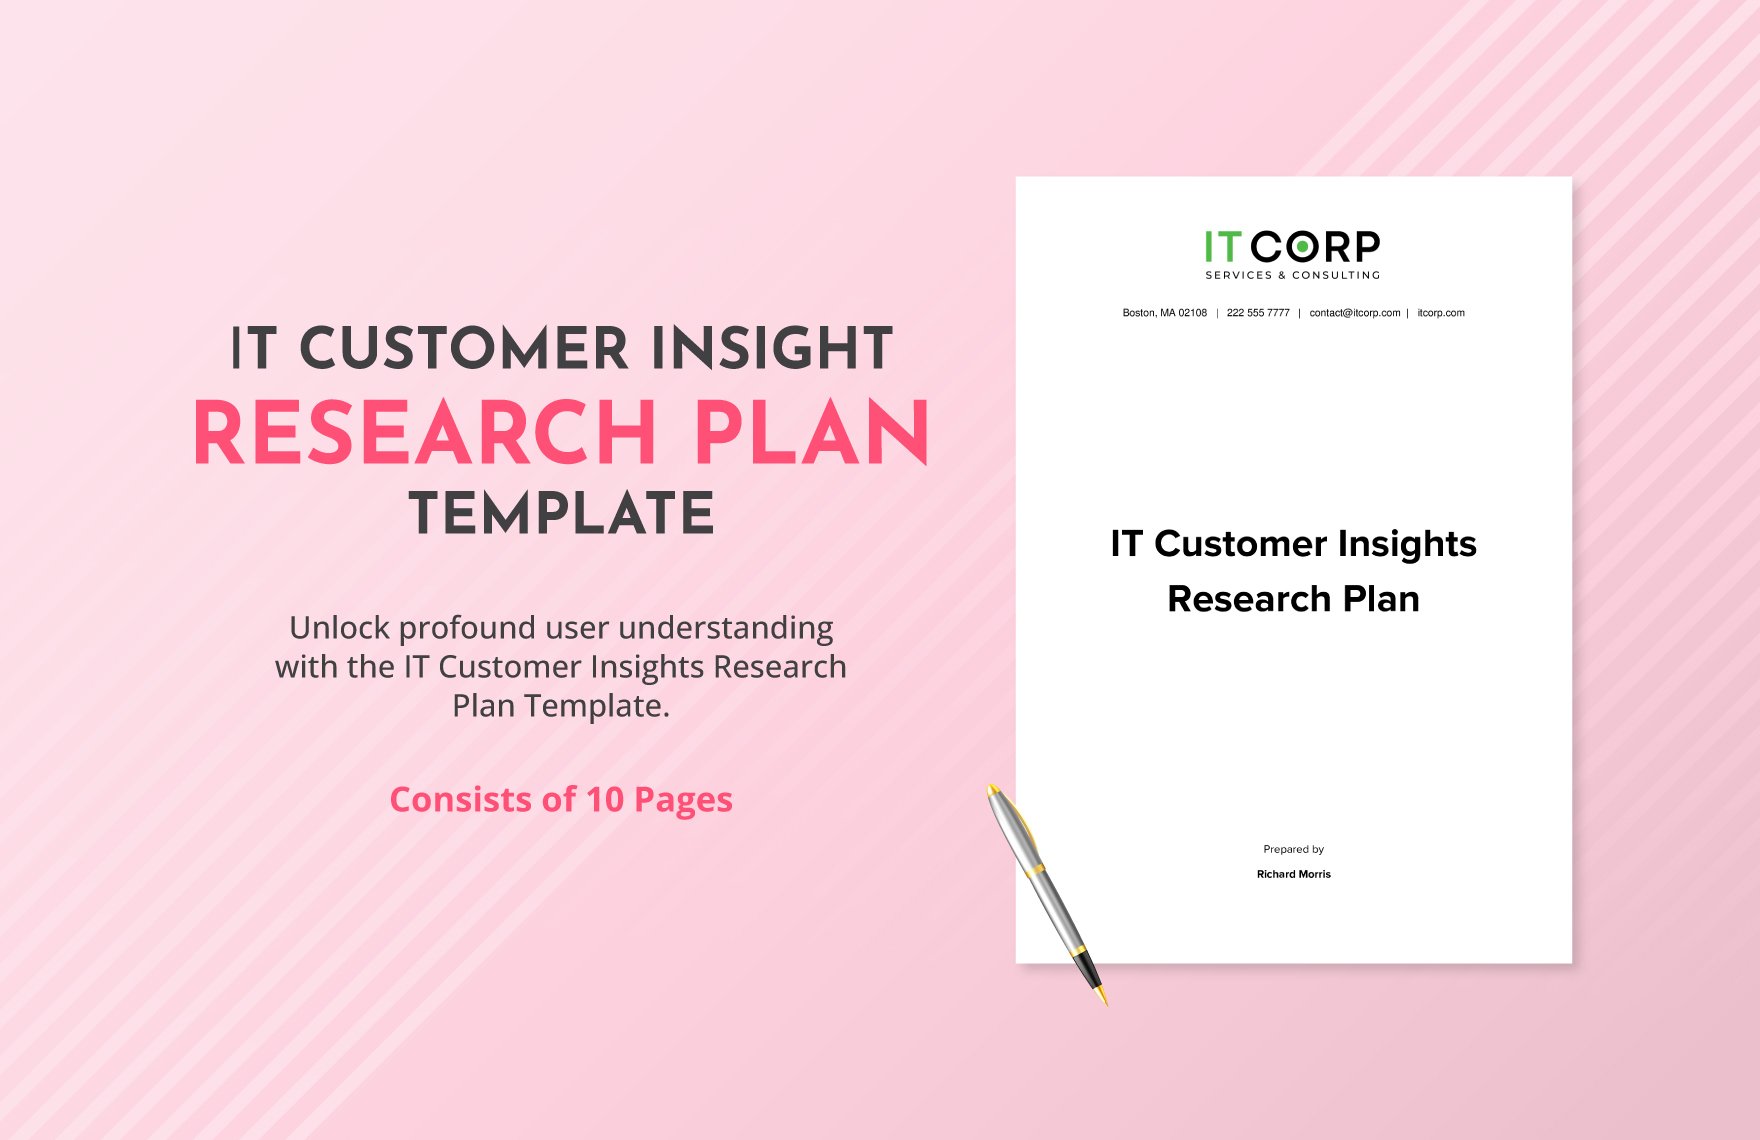 IT Customer Insights Research Plan Template